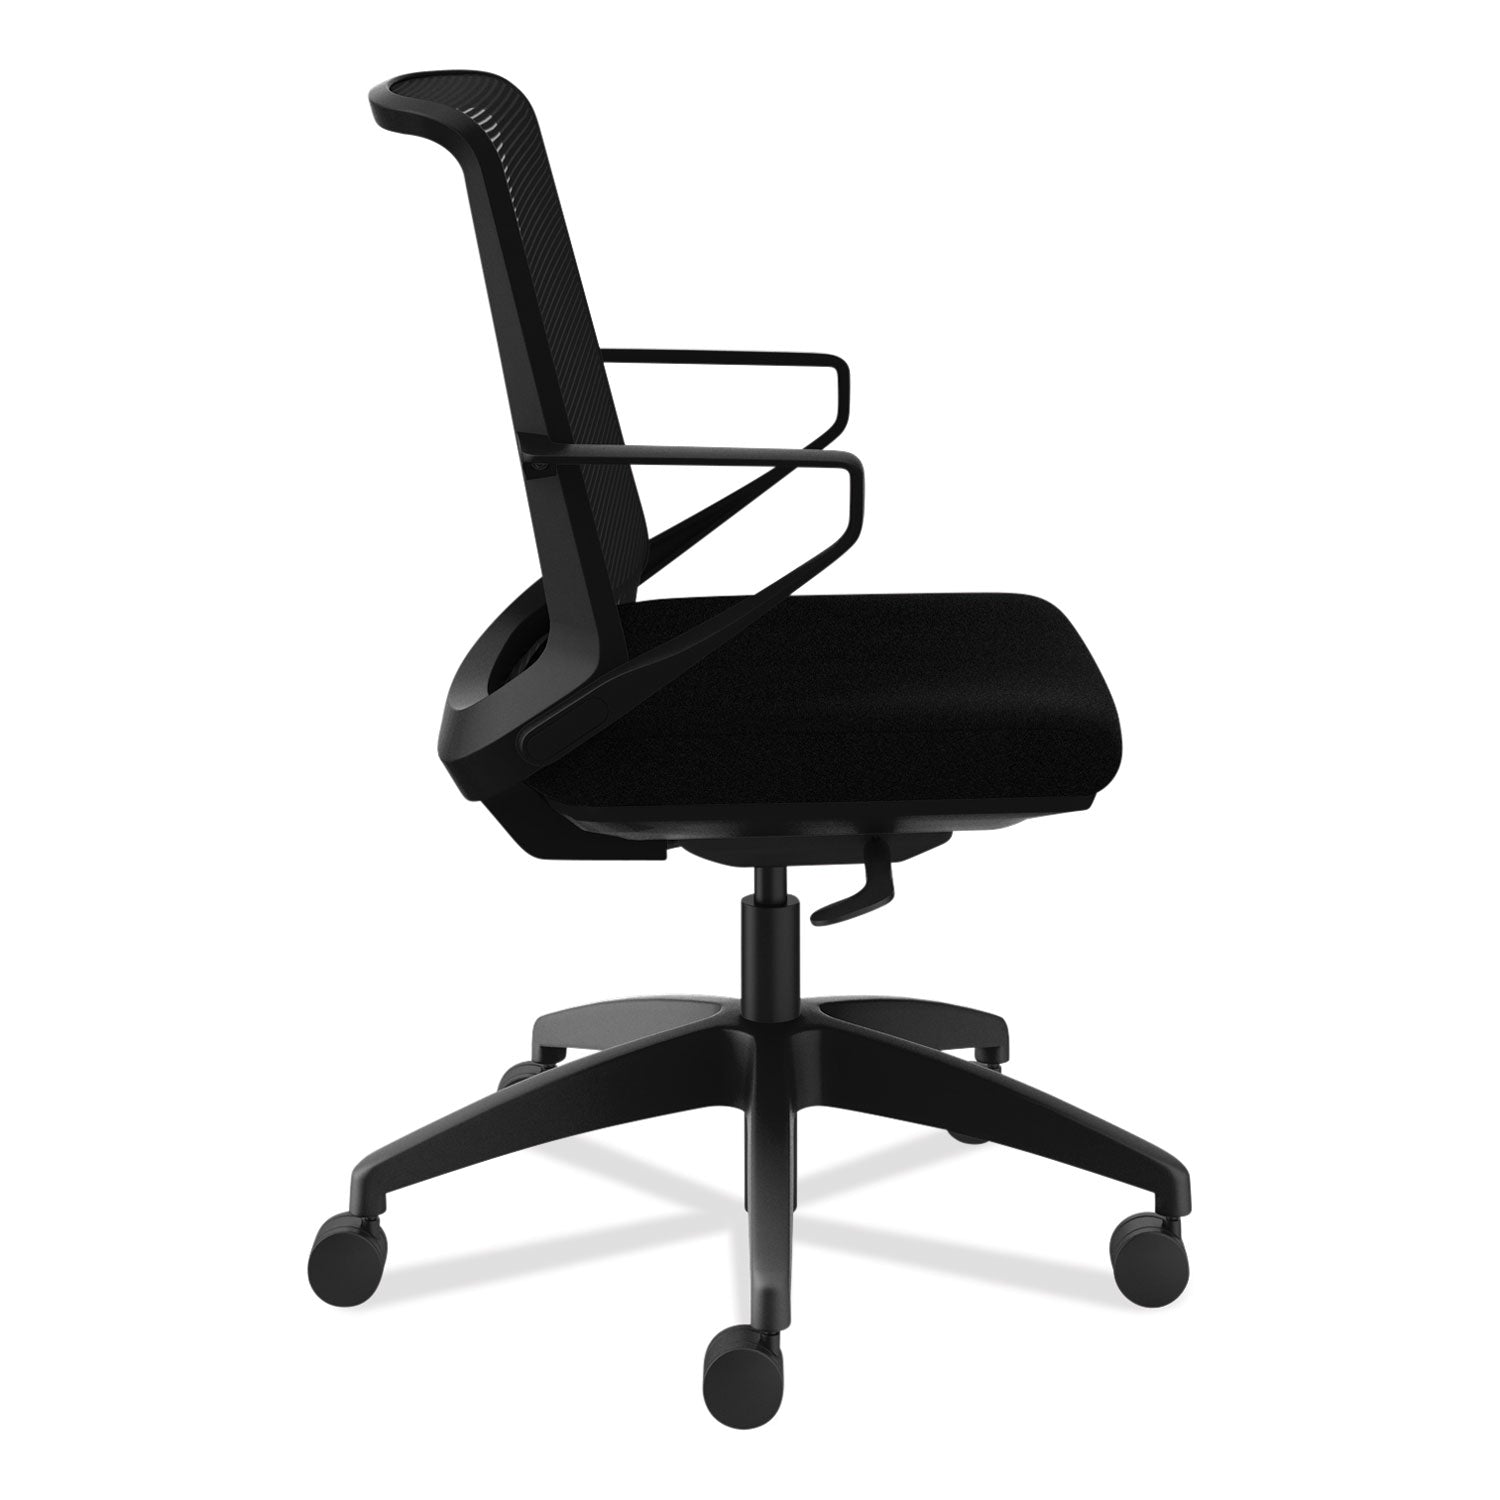 cliq-office-chair-supports-up-to-300-lb-17-to-22-seat-height-black-seat-back-black-base-ships-in-7-10-business-days_honclqimcu10t - 3